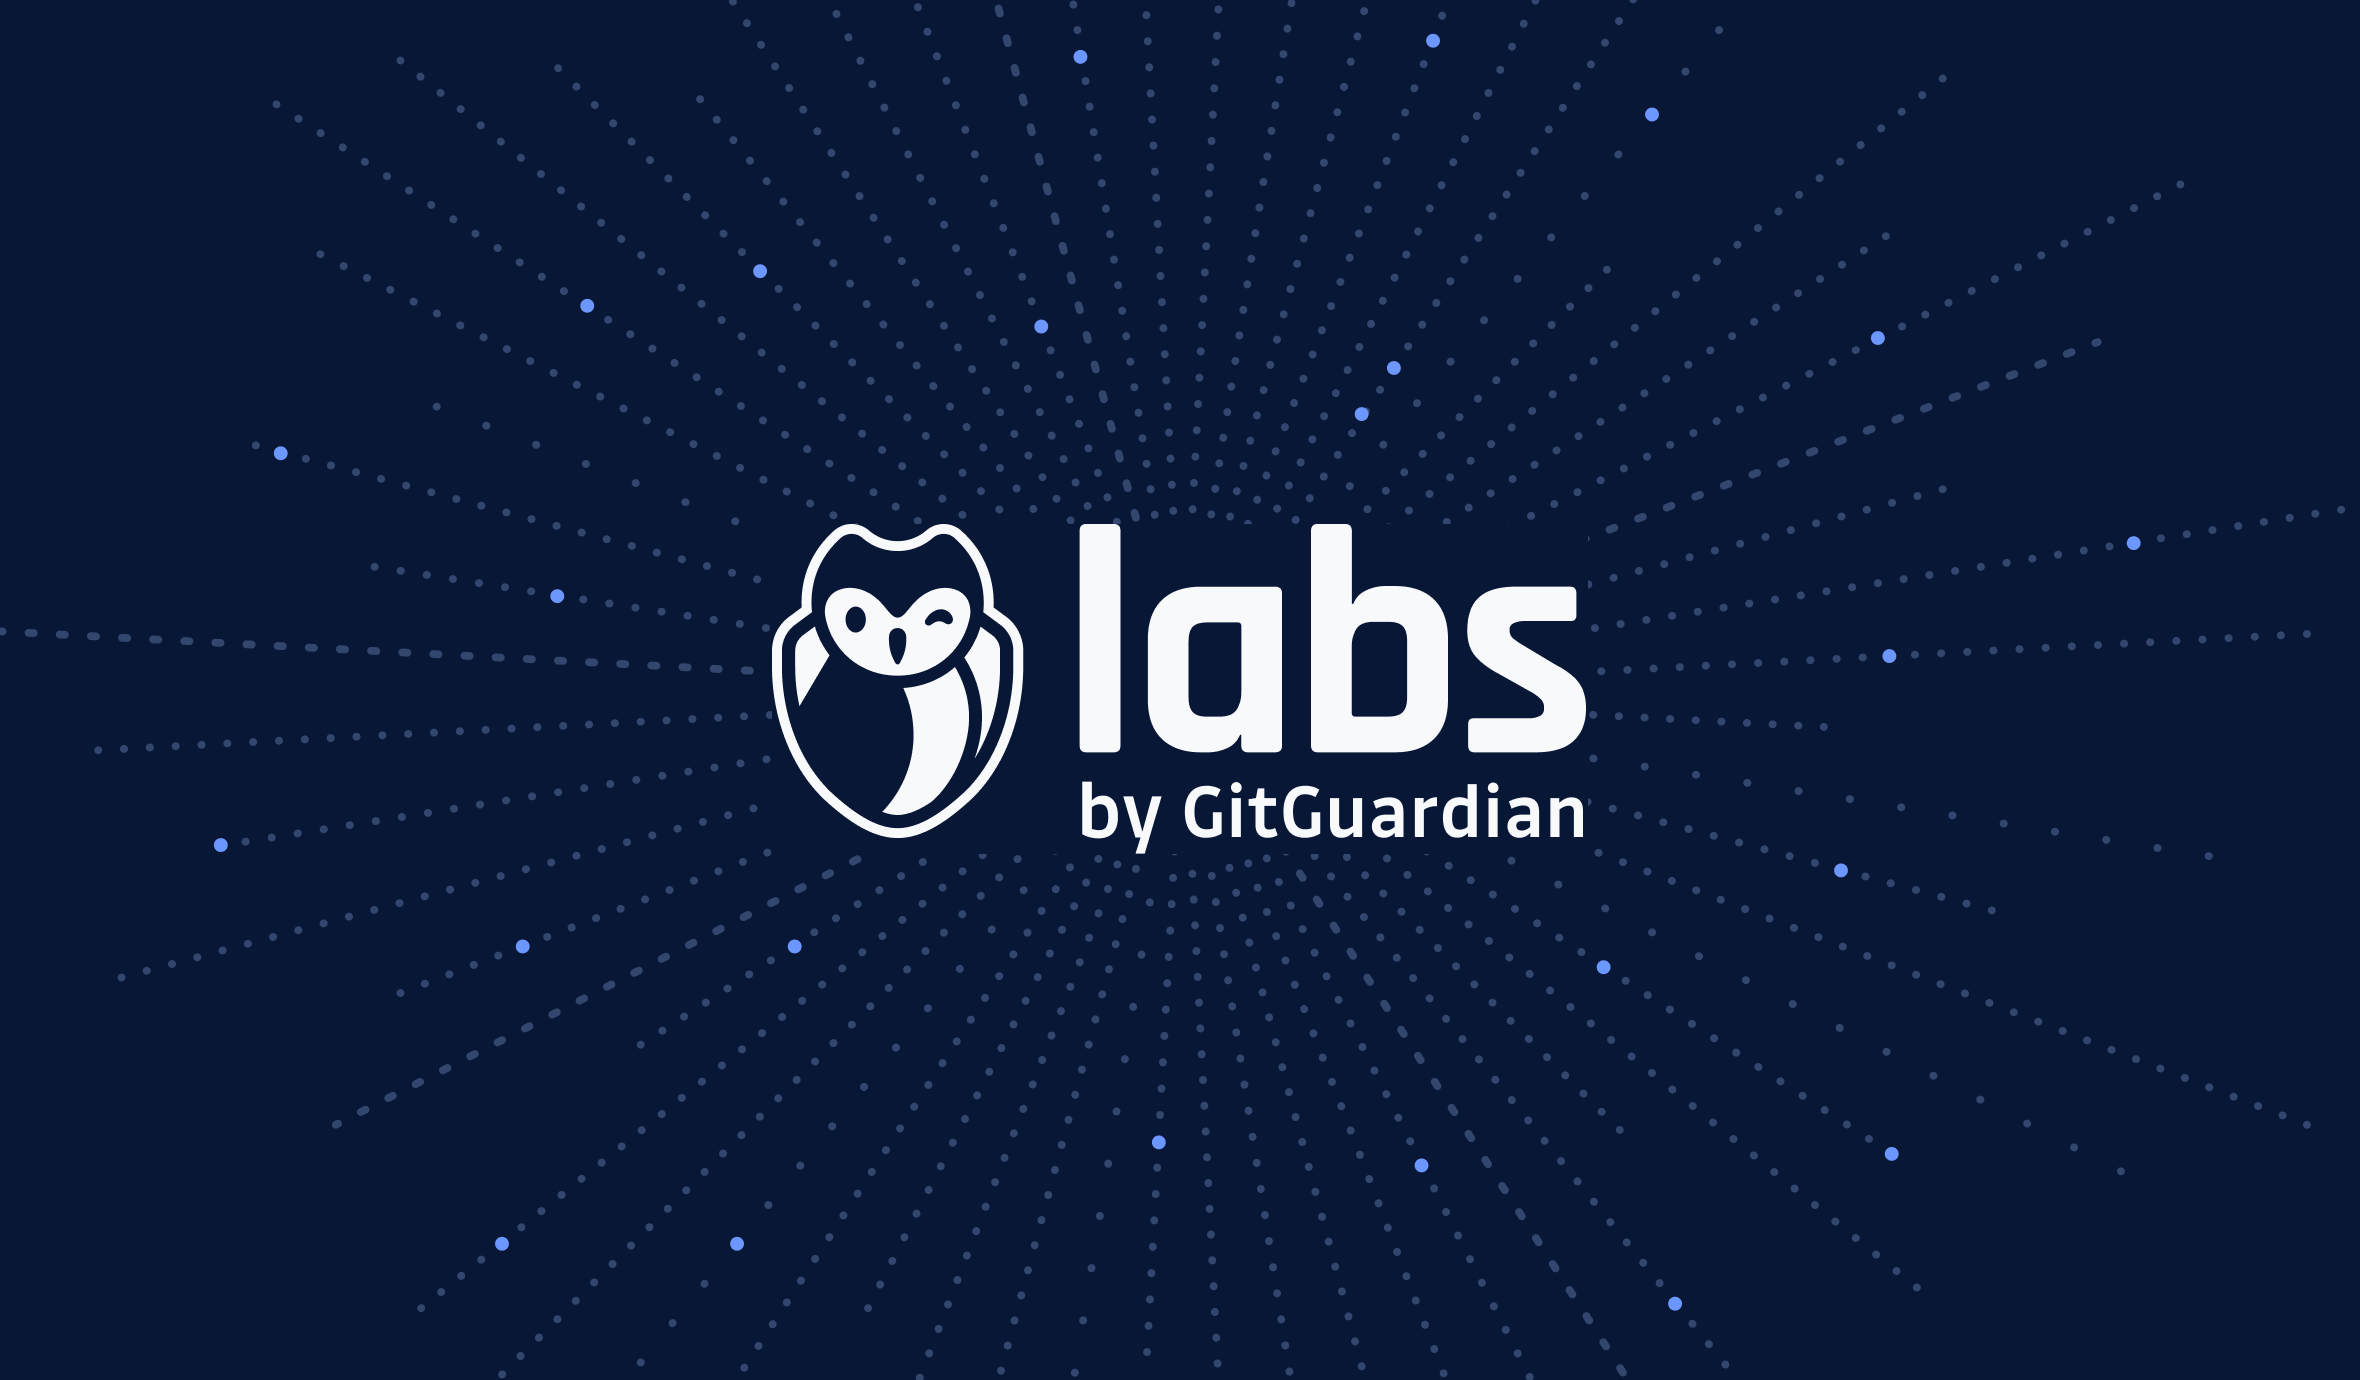 Announcing GitGuardian Labs - an interview with Eric, GitGuardian's CTO